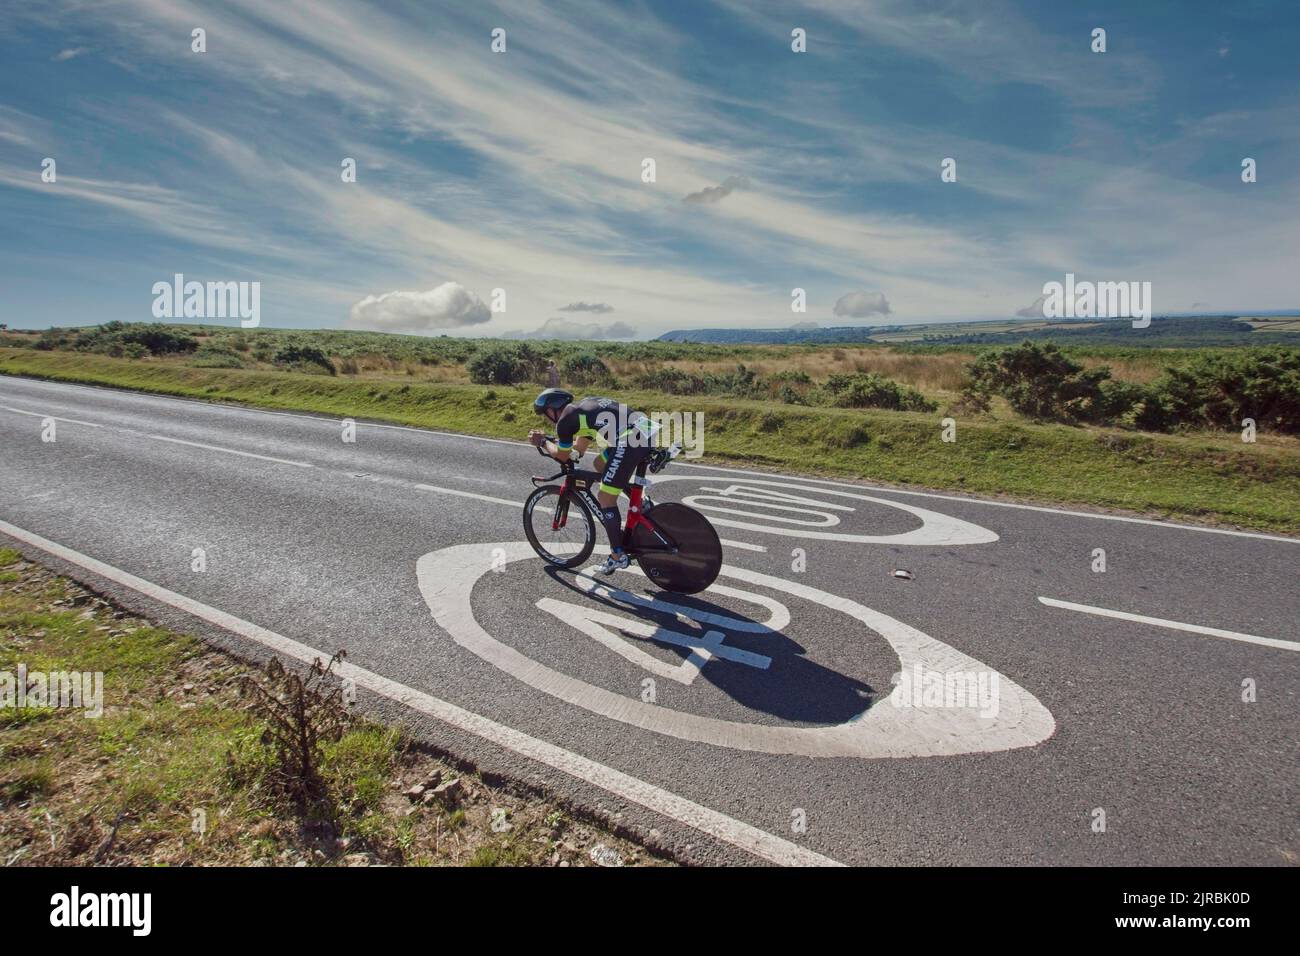 7thAug22 Gower Swansea Wales UK Triathlon Ironman cycling event Cyclist crossing road painted '40' speed limit sign Centre frame heading right to left Stock Photo